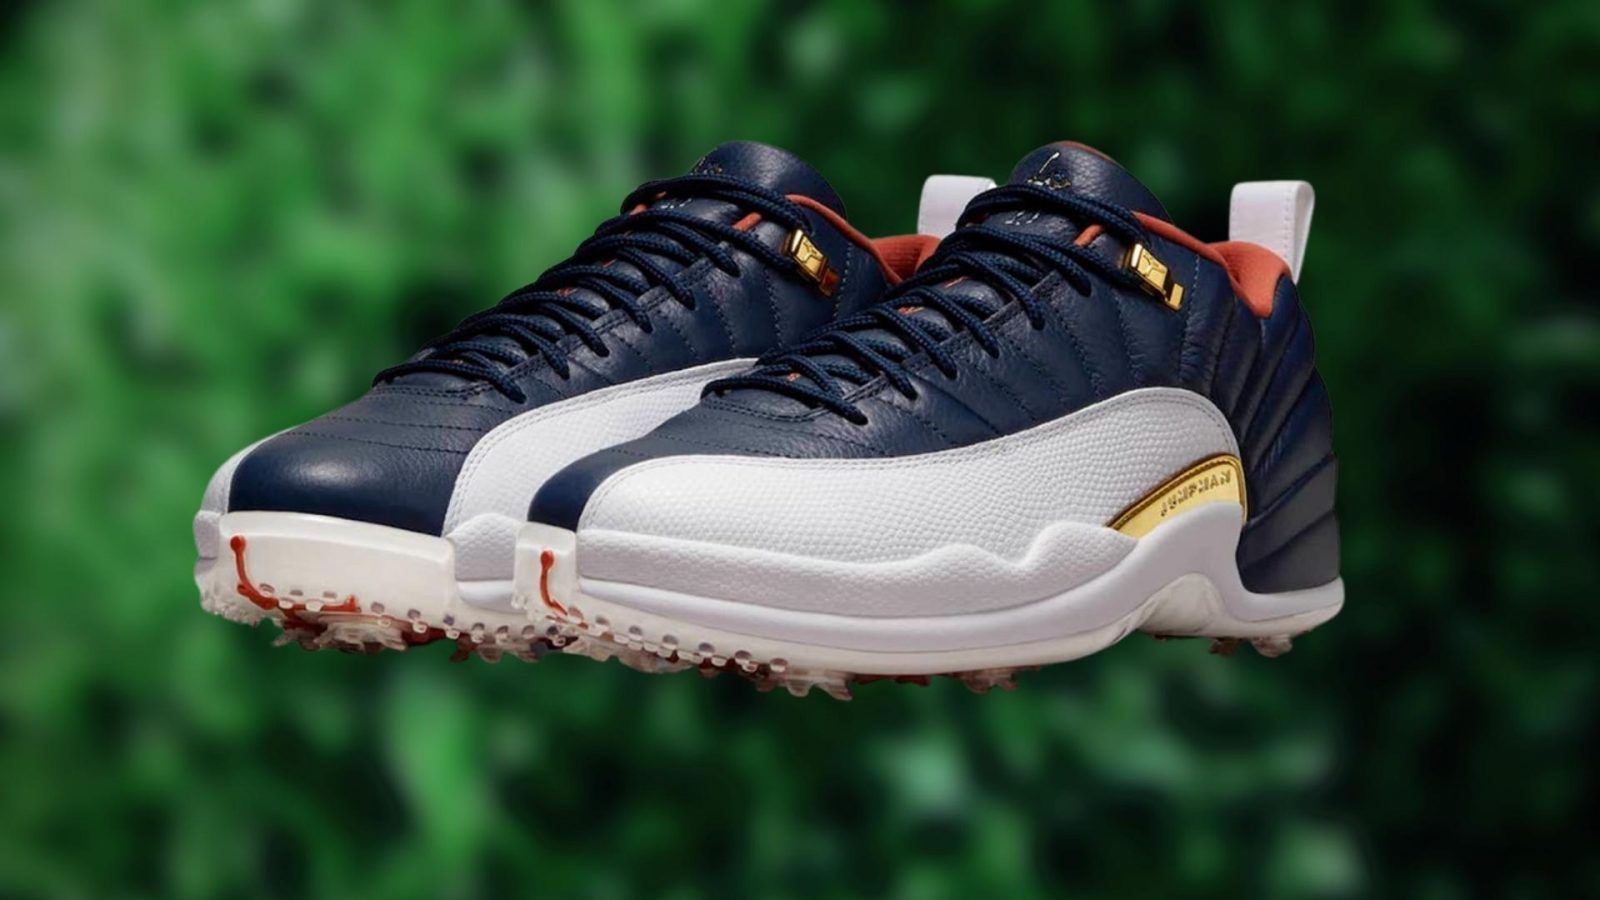 Eastside Golf and Jordan Brand prove golf can be cool, actually